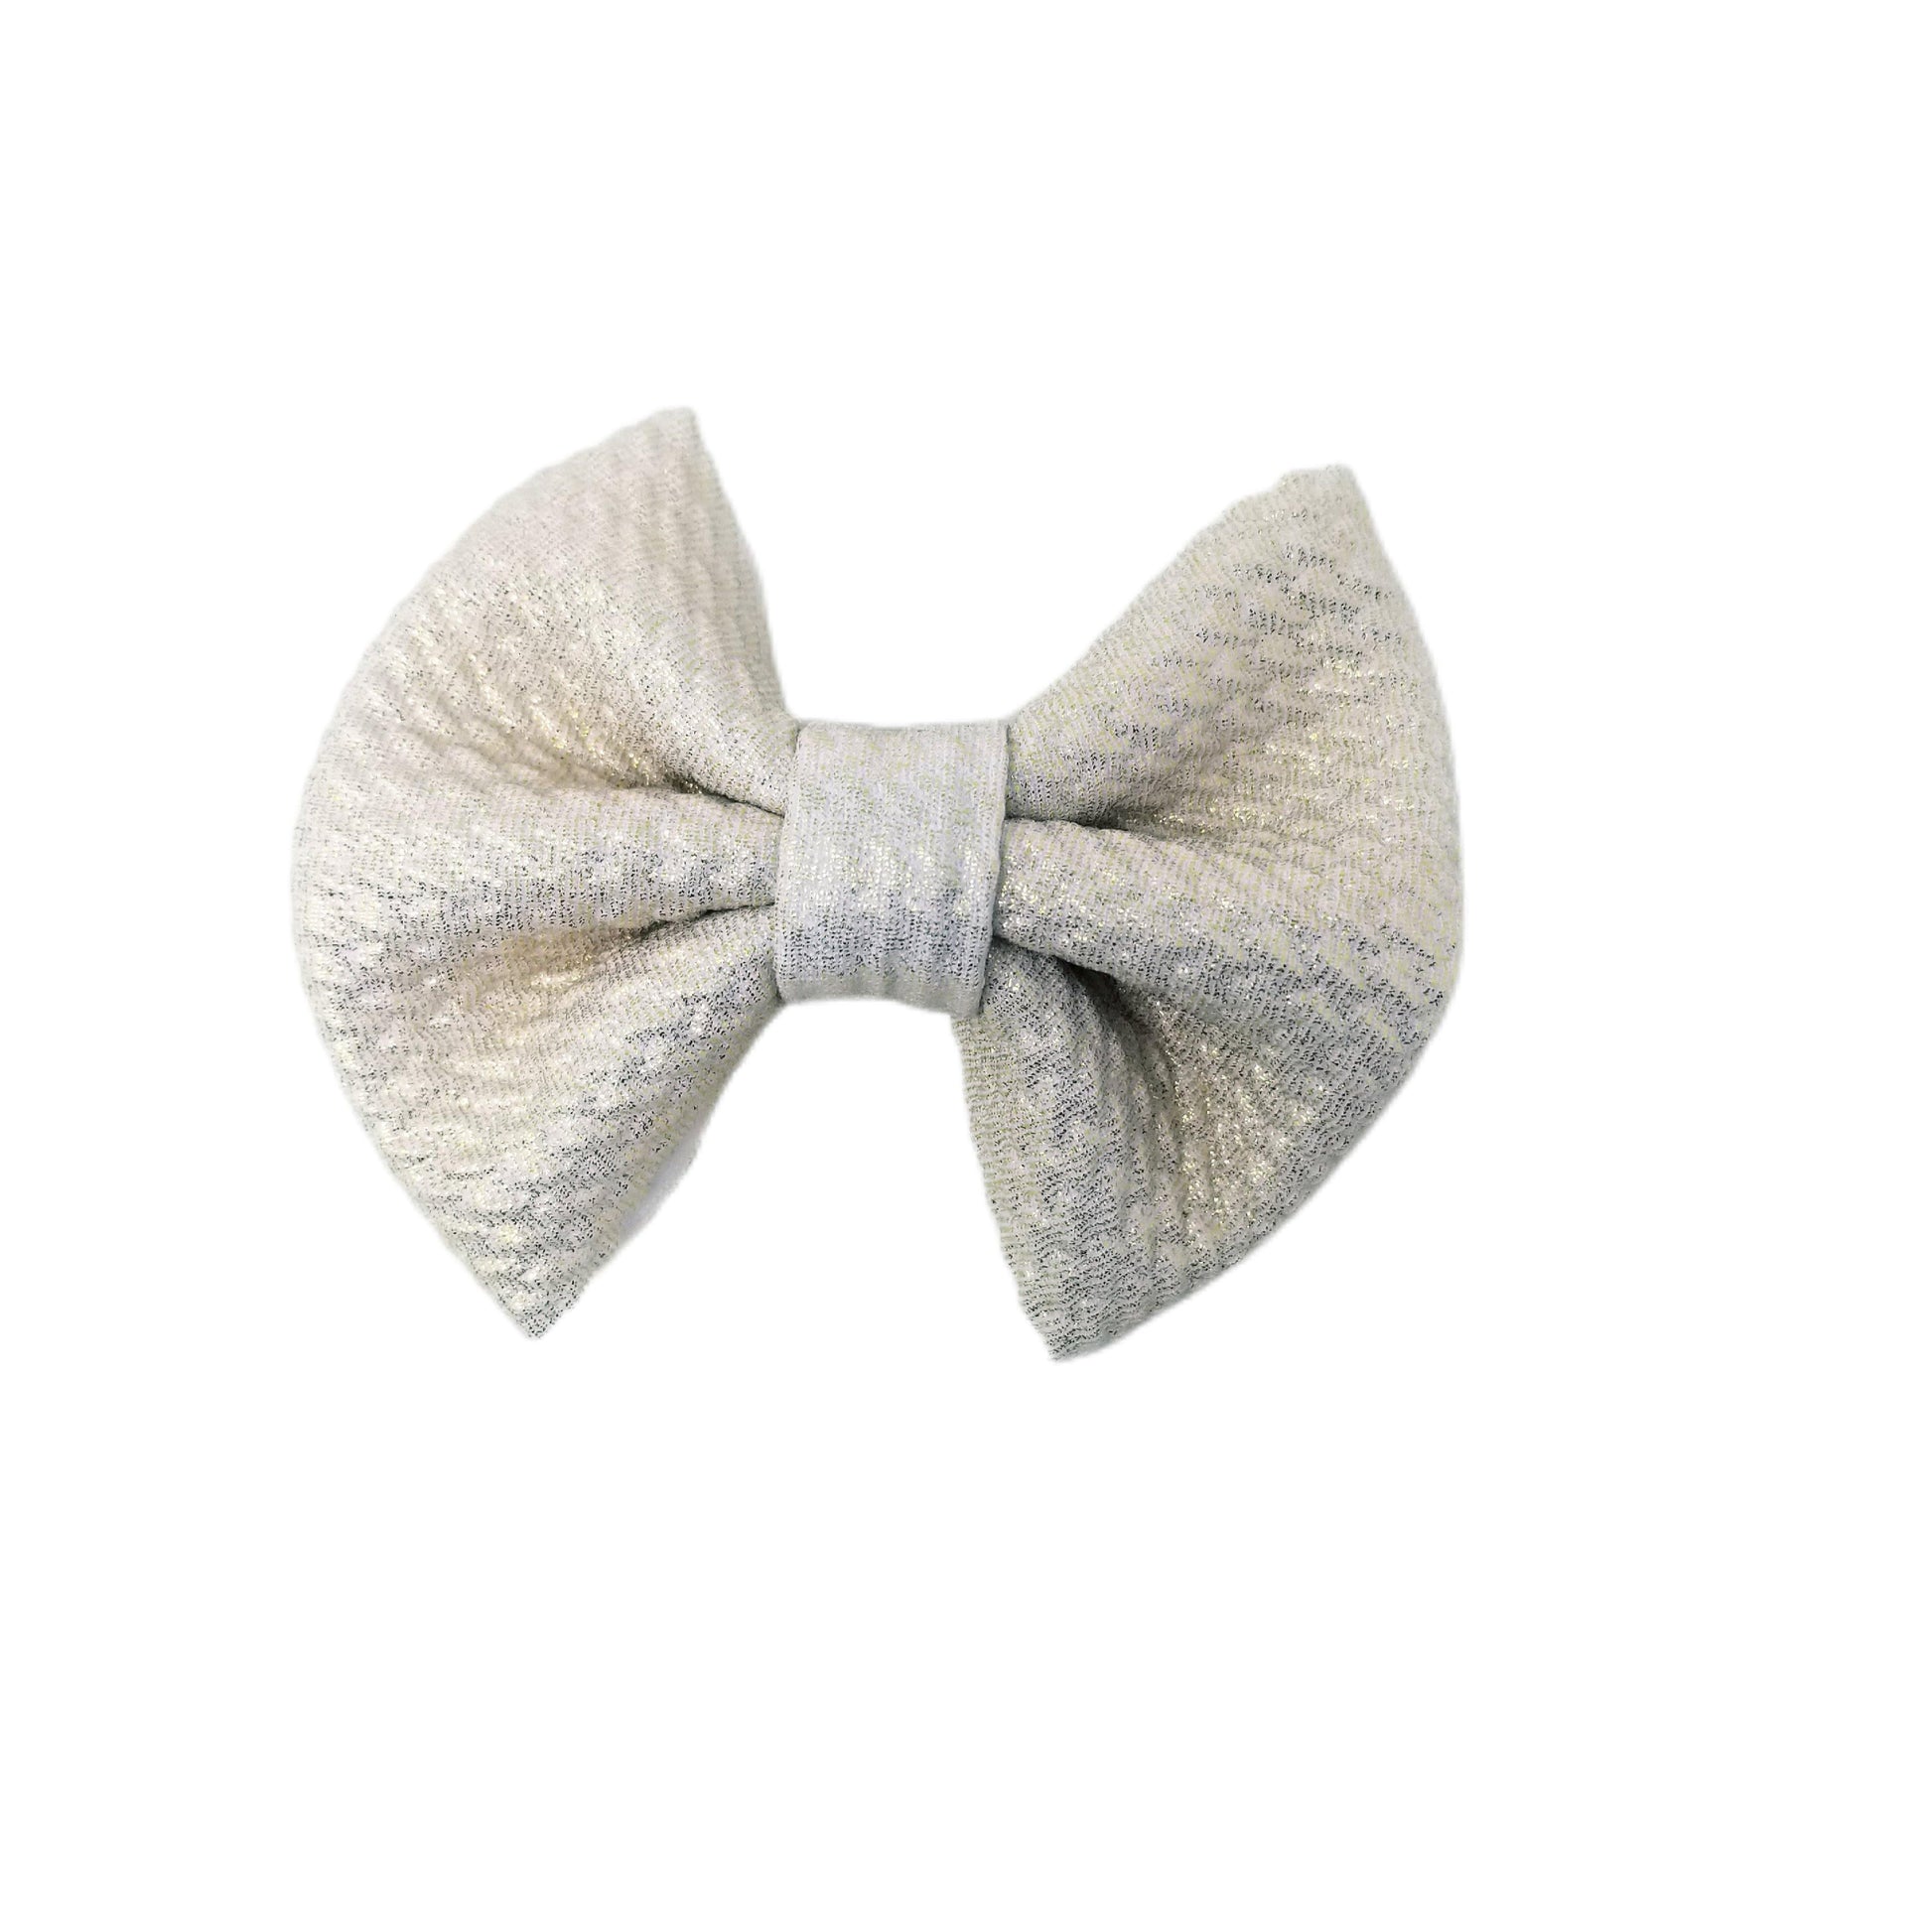 3 inch White Shimmer Fabric Bow